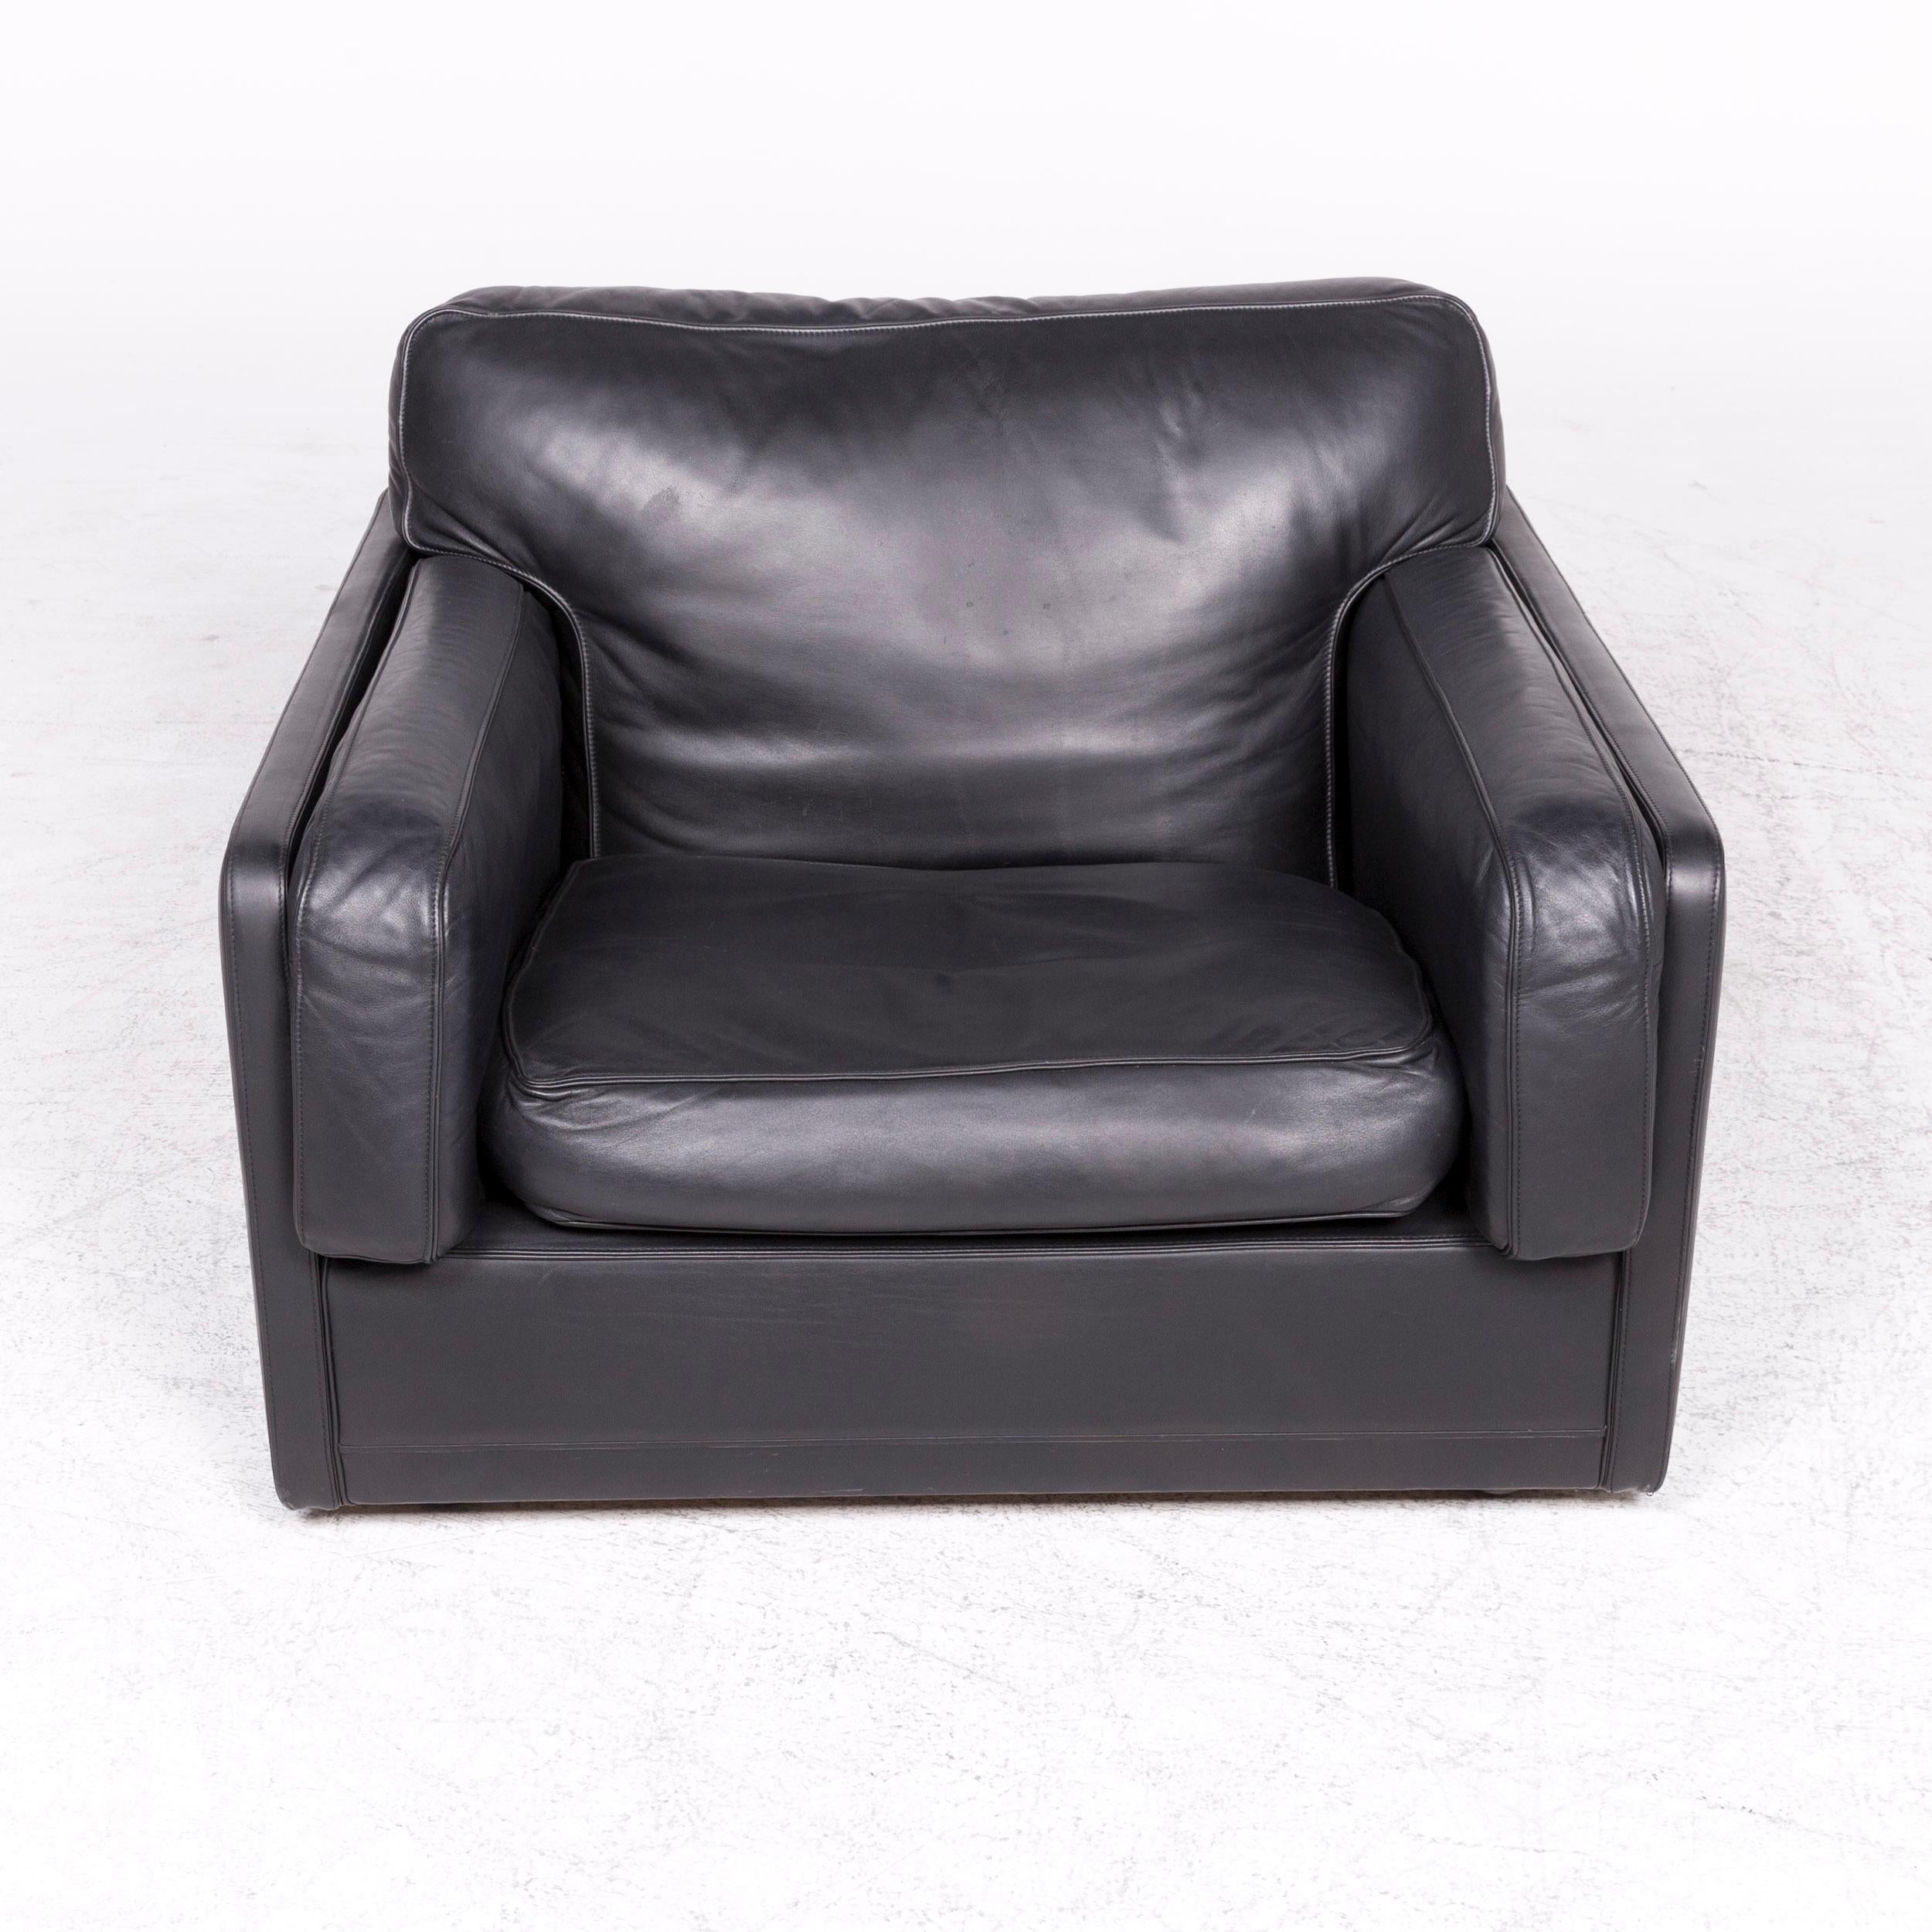 Contemporary Poltrona Frau Socrate Designer Leather Armchair Black Genuine Leather Chair For Sale